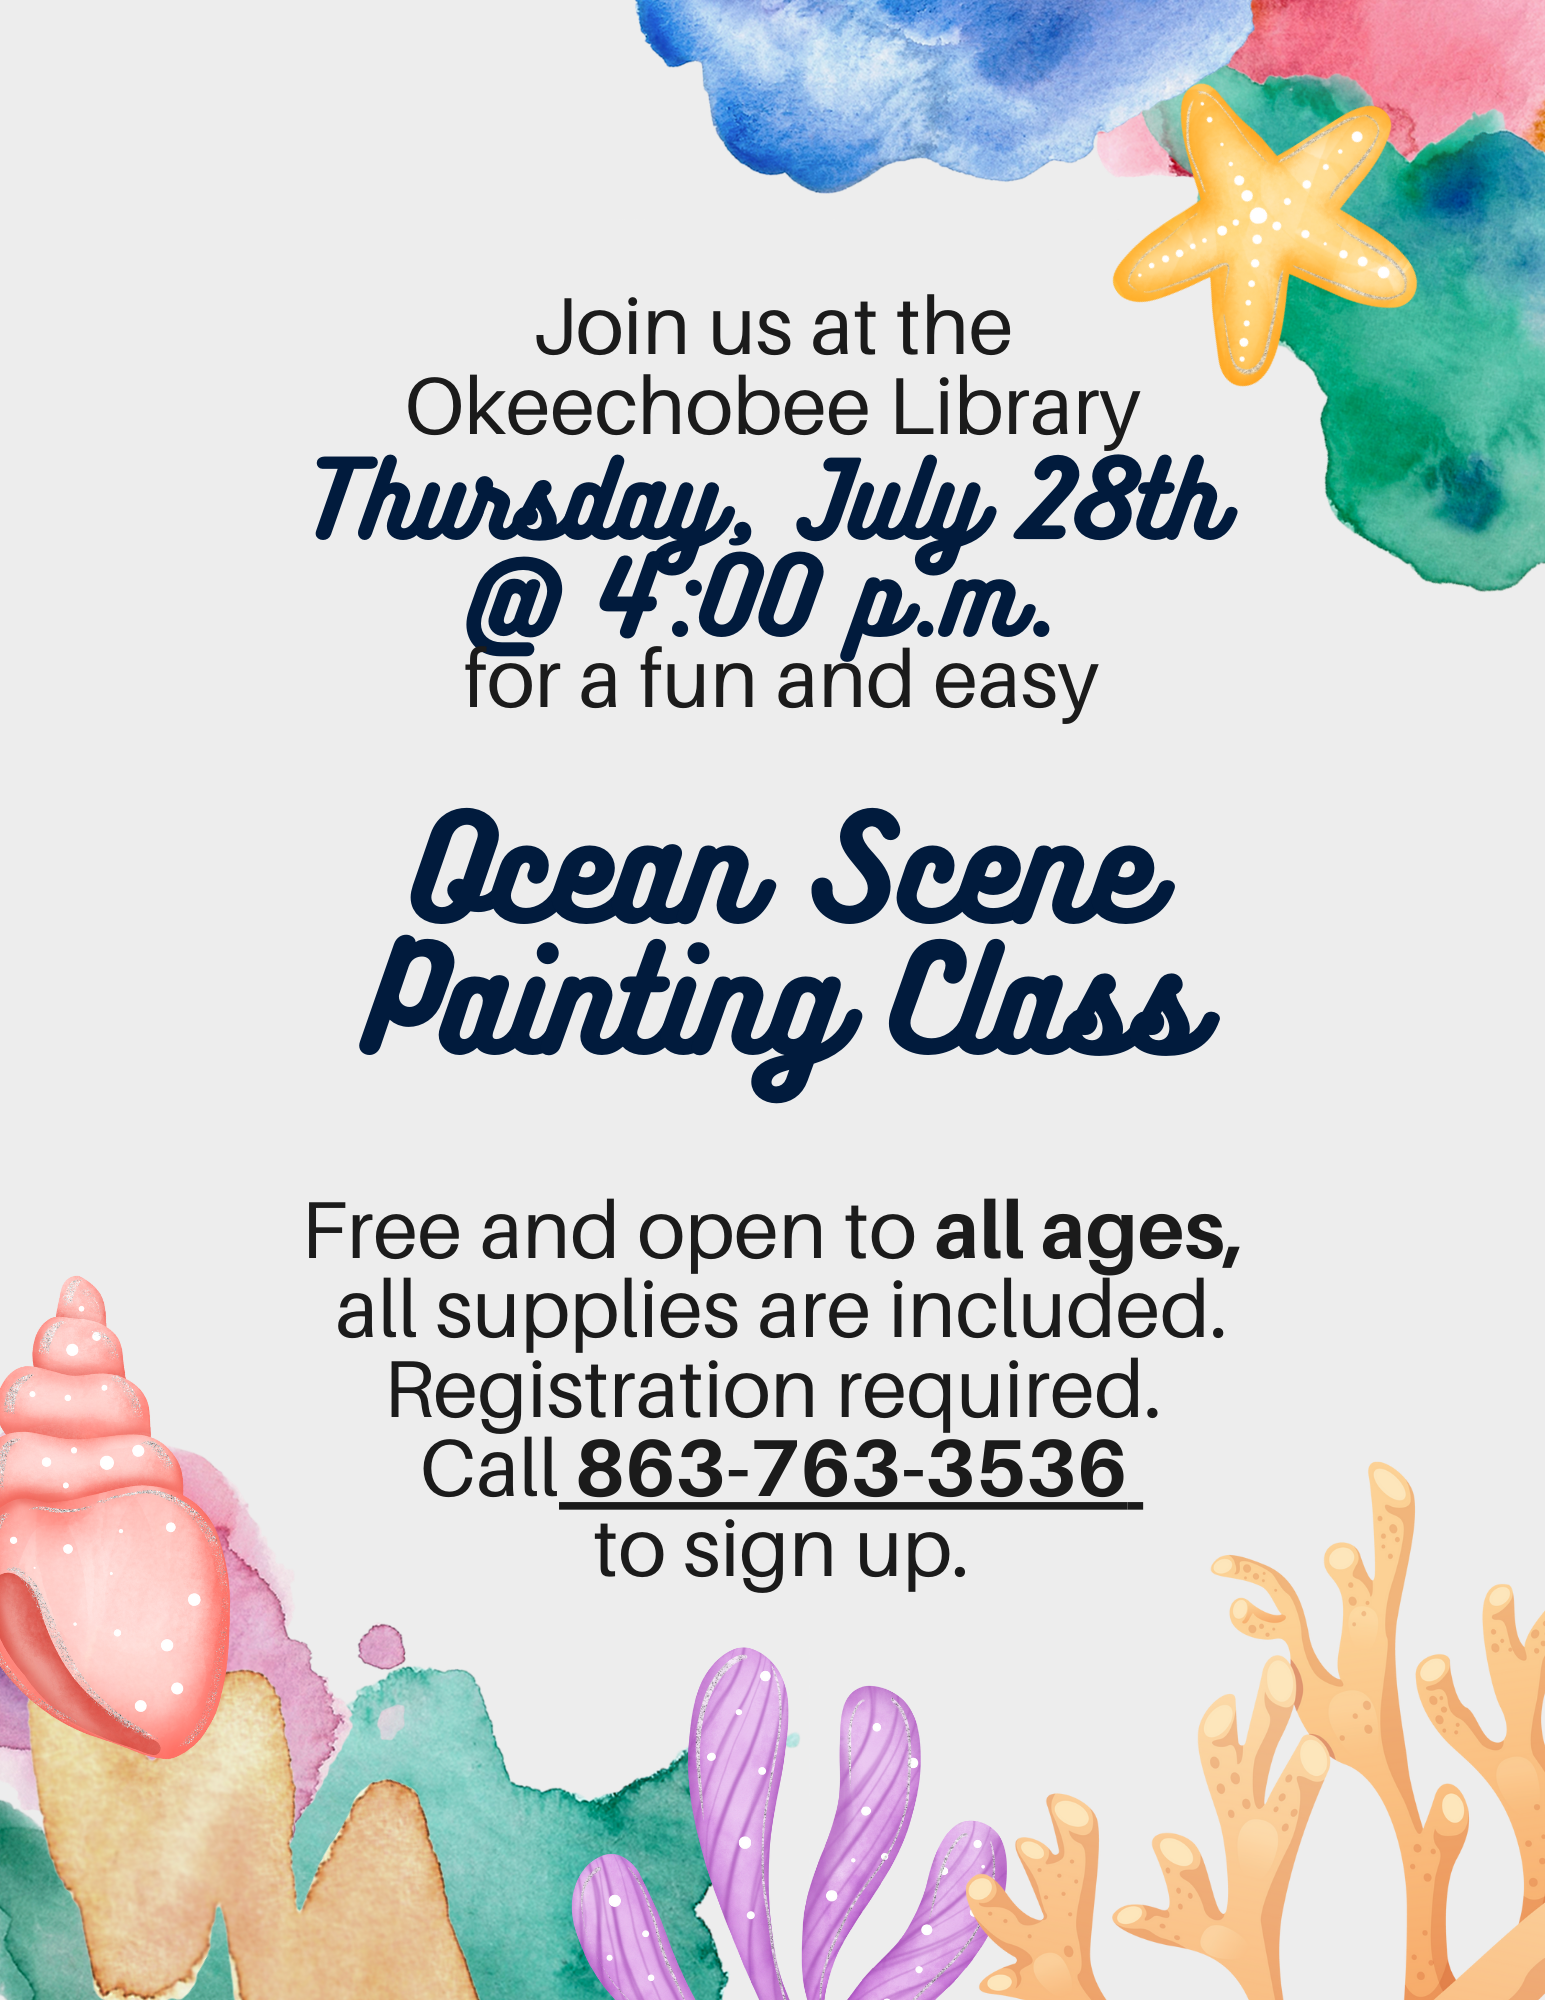 Join us at the Okeechobee Library on Thursday, July 28th at 4:00 p.m. for a fun and easy Ocean Scene Painting Class. This class is open to all ages and all supplies are included. Registration is required. Call 863-763-3536 to sign-up